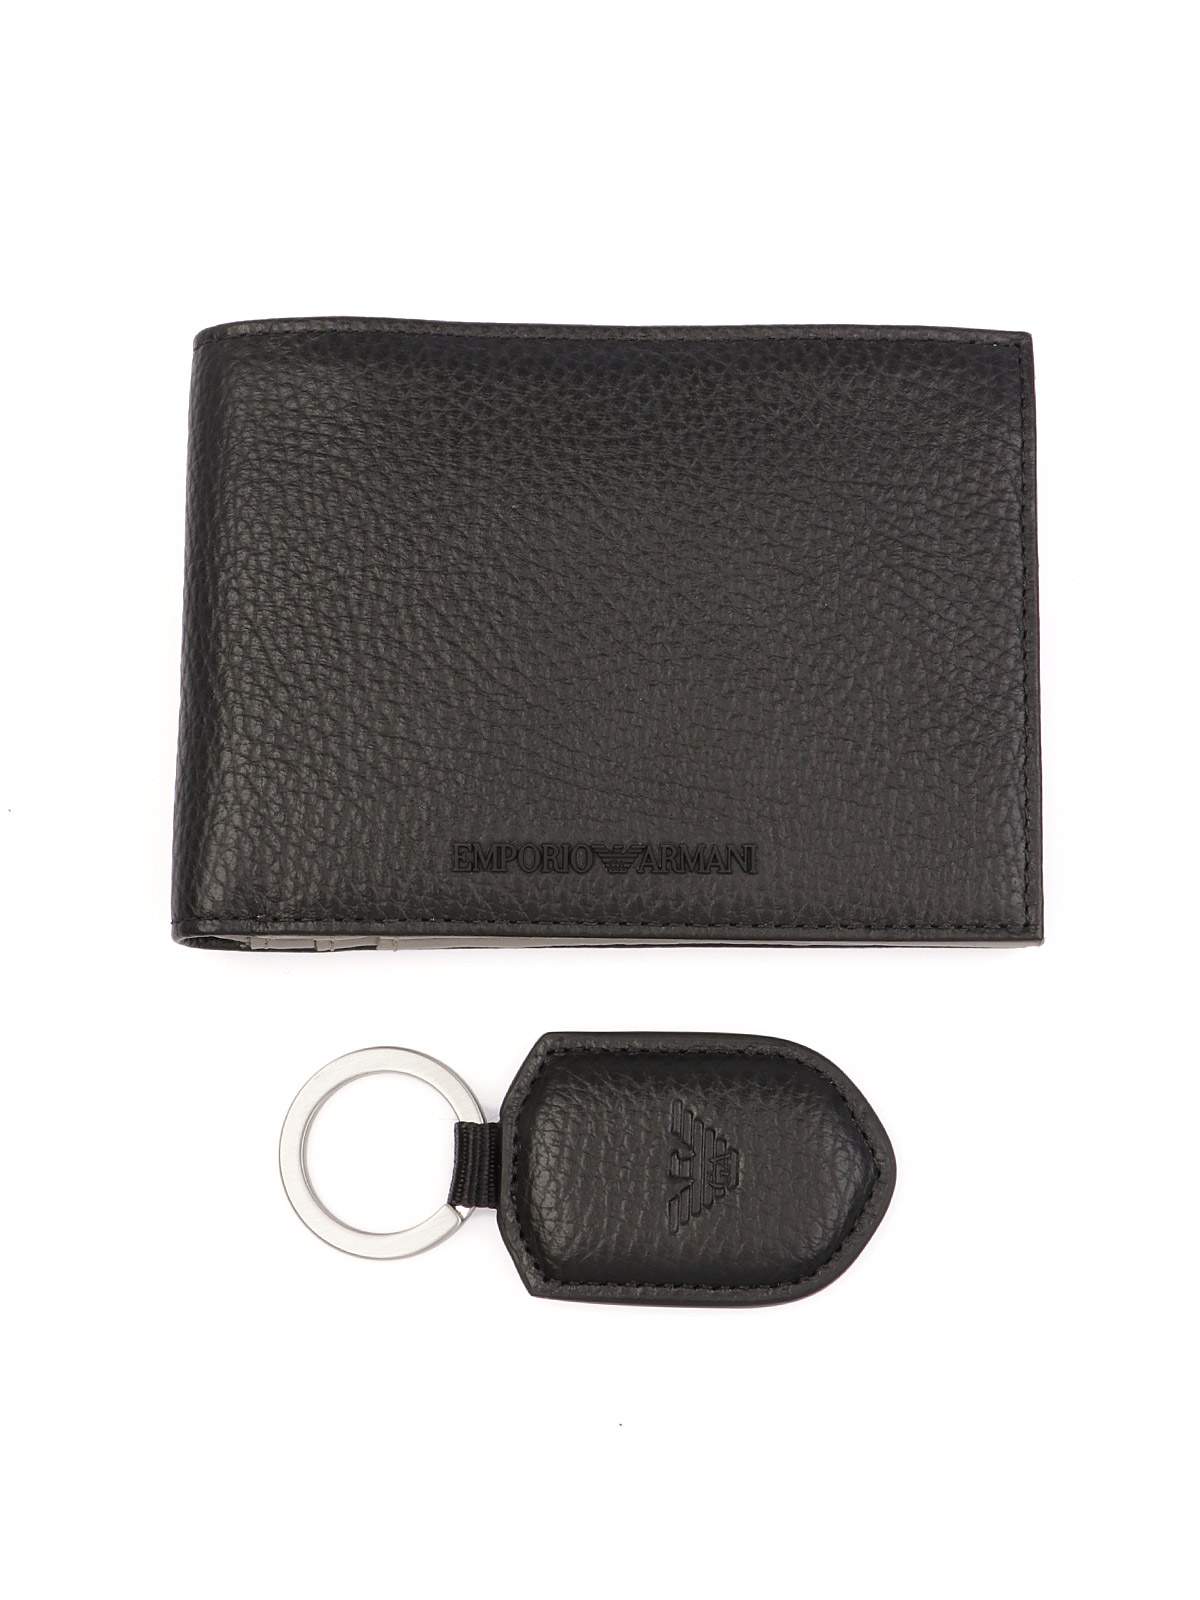 Picture of EMPORIO ARMANI | Men's Wallet and Key Holder Set